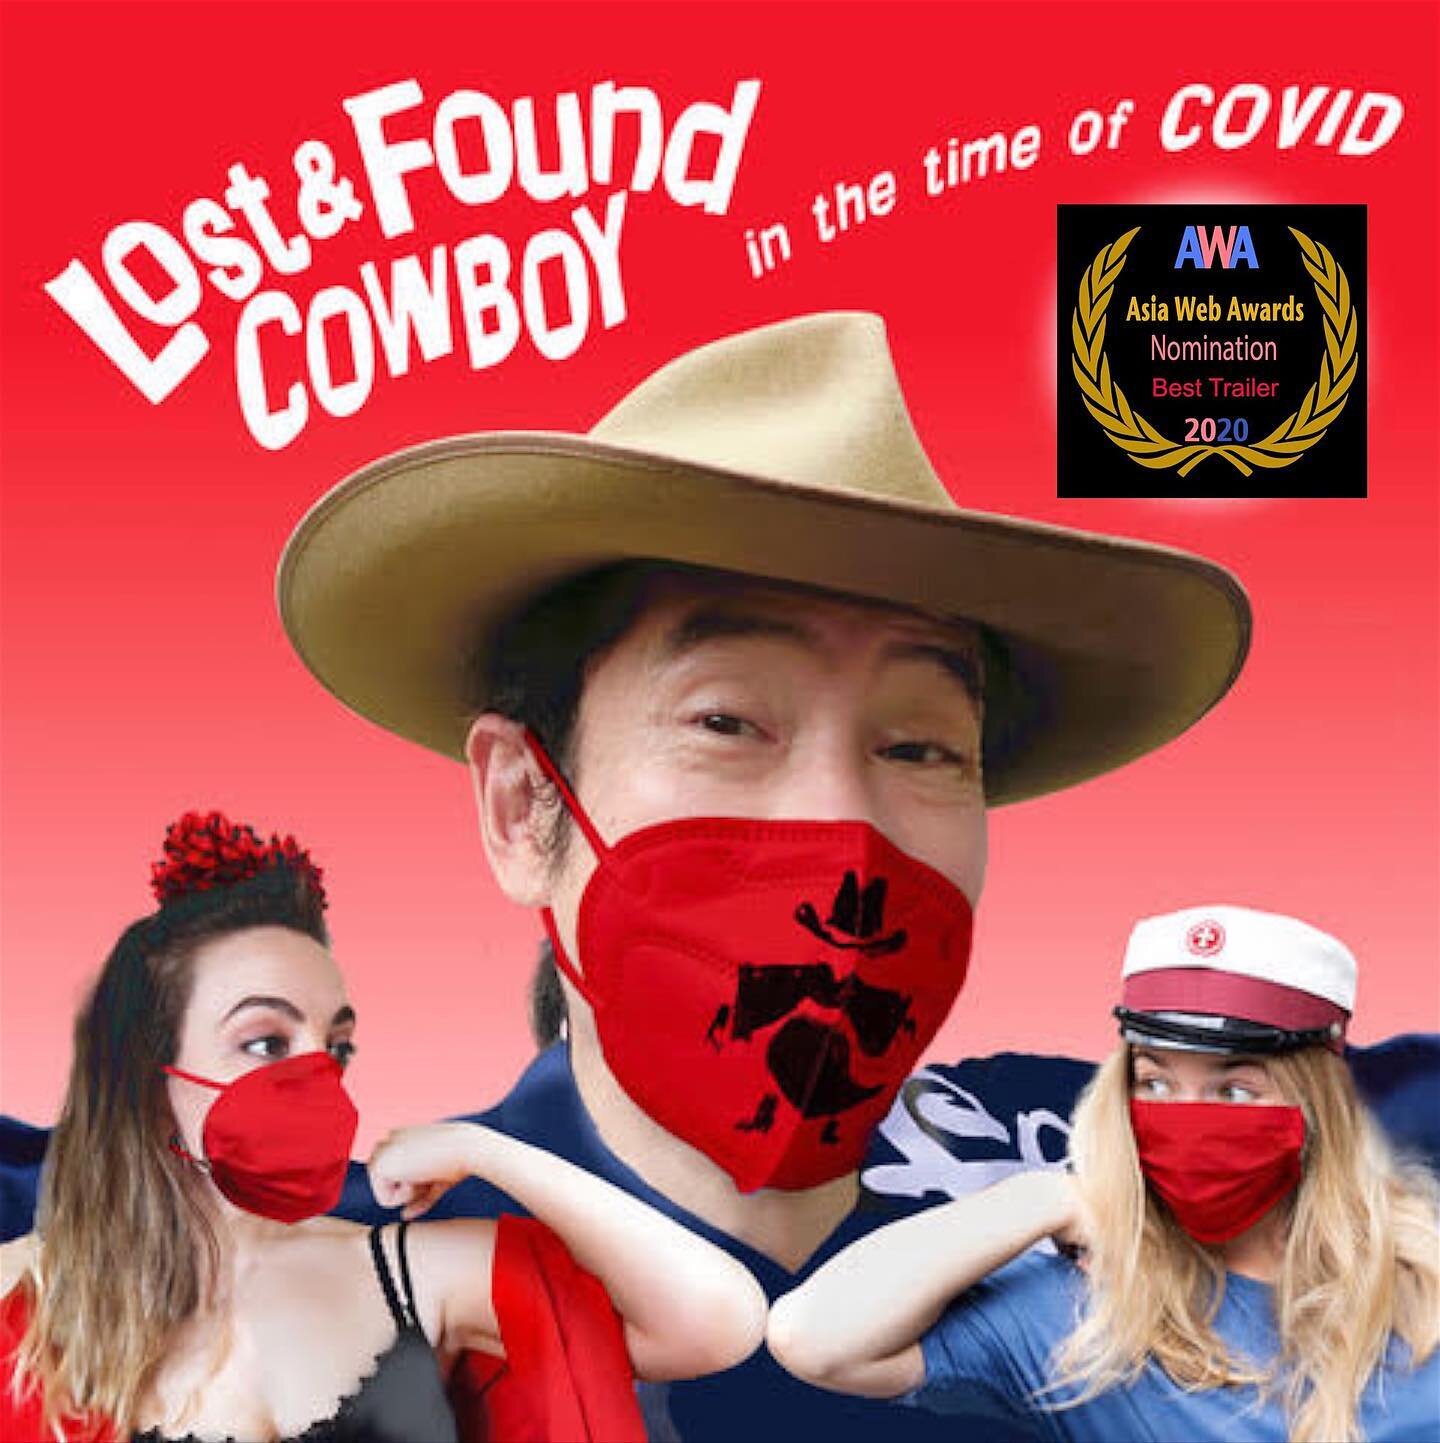 🤠🙏Thank you @asiawebawards for the 7 nominations for 
&quot;LOST &amp; FOUND COWBOY&quot;! 
- Best Trailer for our new season: &quot;Lost &amp; Found Cowboy - In the Time of COVID&quot; (co-starring @laerkeolsvig @sta.delmar )
- Best Costume Design